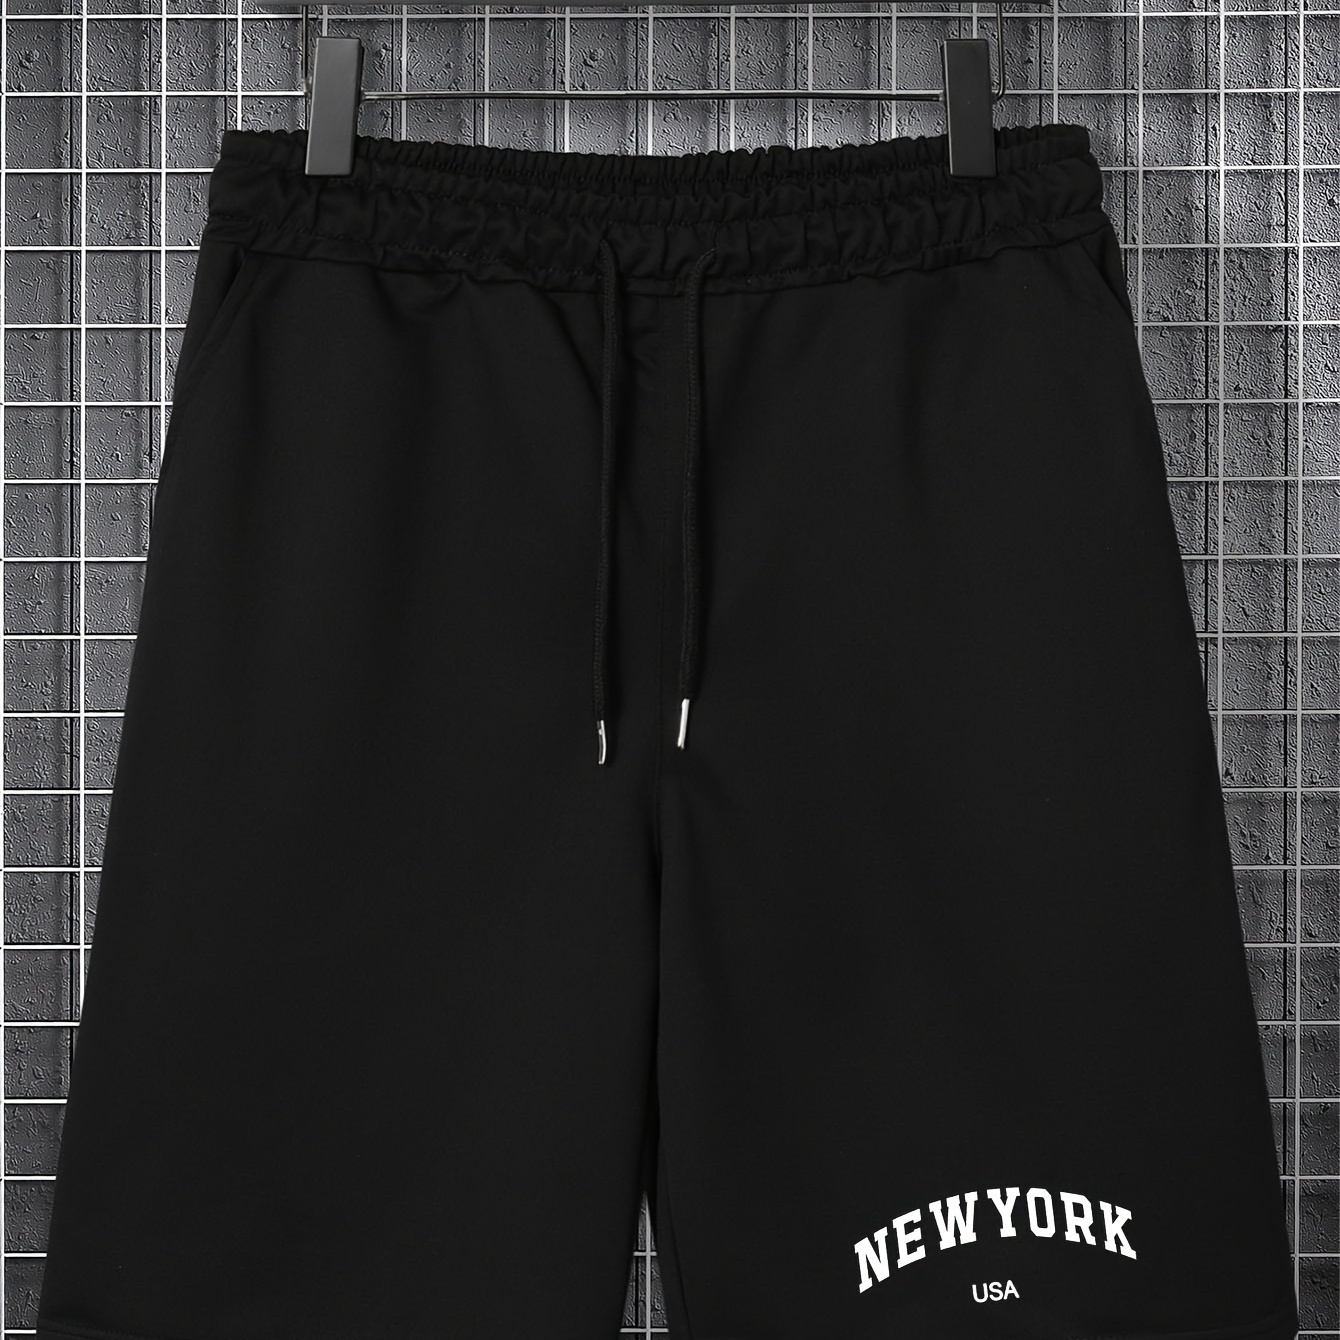 

new York & Usa" Graphic Men's Plus Size Drawstring Stretchy Short Pants, Fashion Streetwear Shorts For Comfort & Casual Chic Style Fit Summer